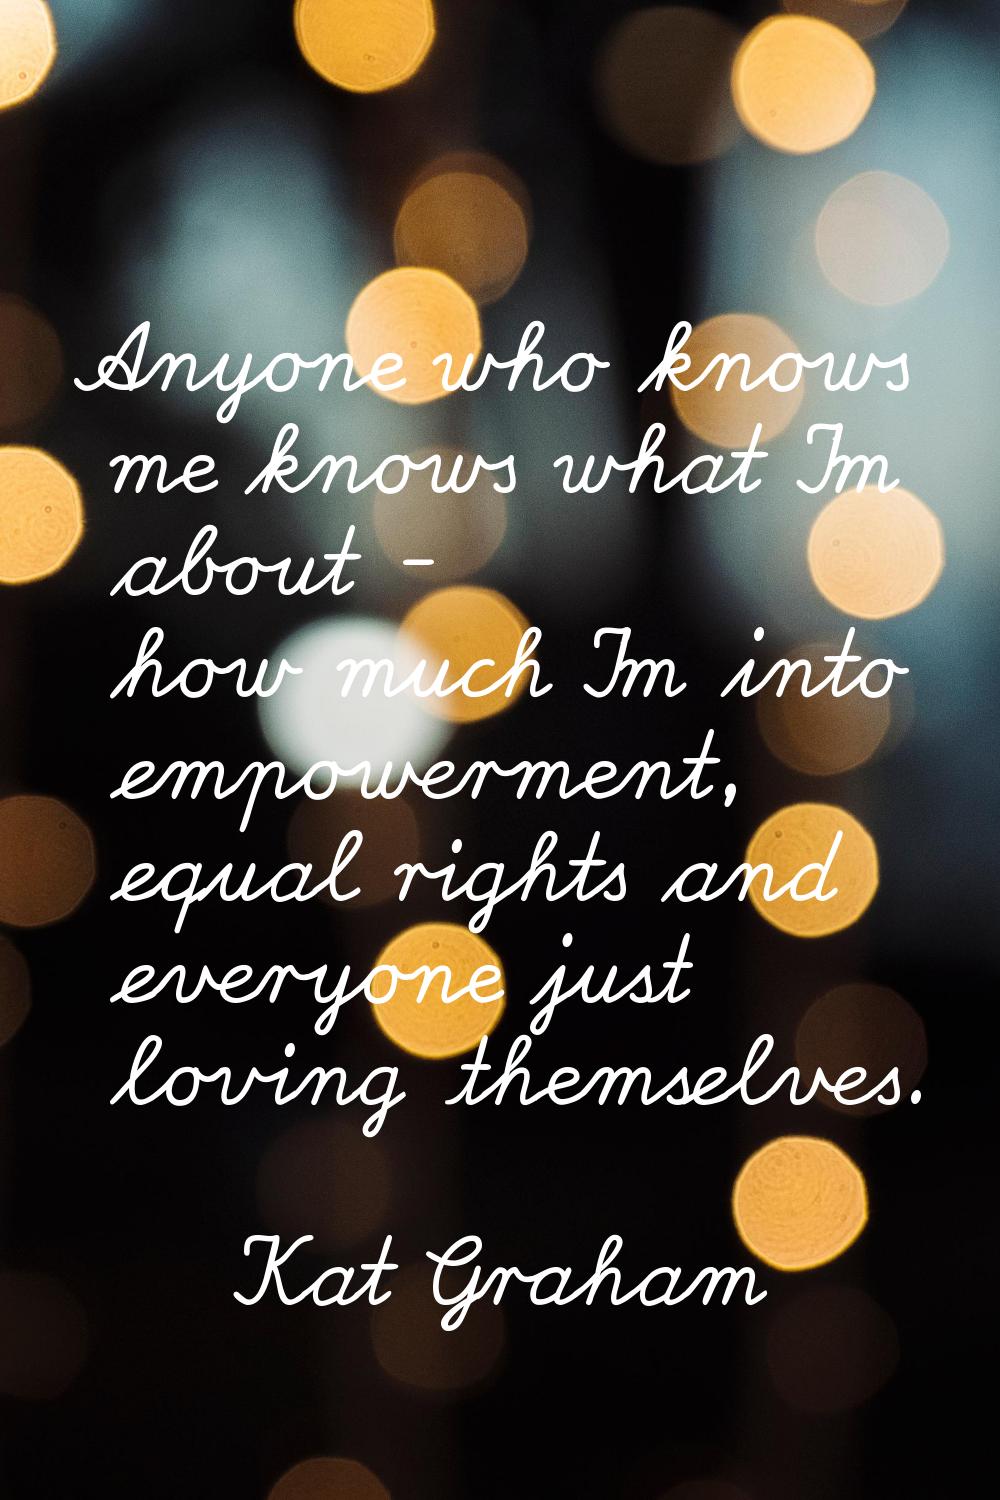 Anyone who knows me knows what I'm about - how much I'm into empowerment, equal rights and everyone